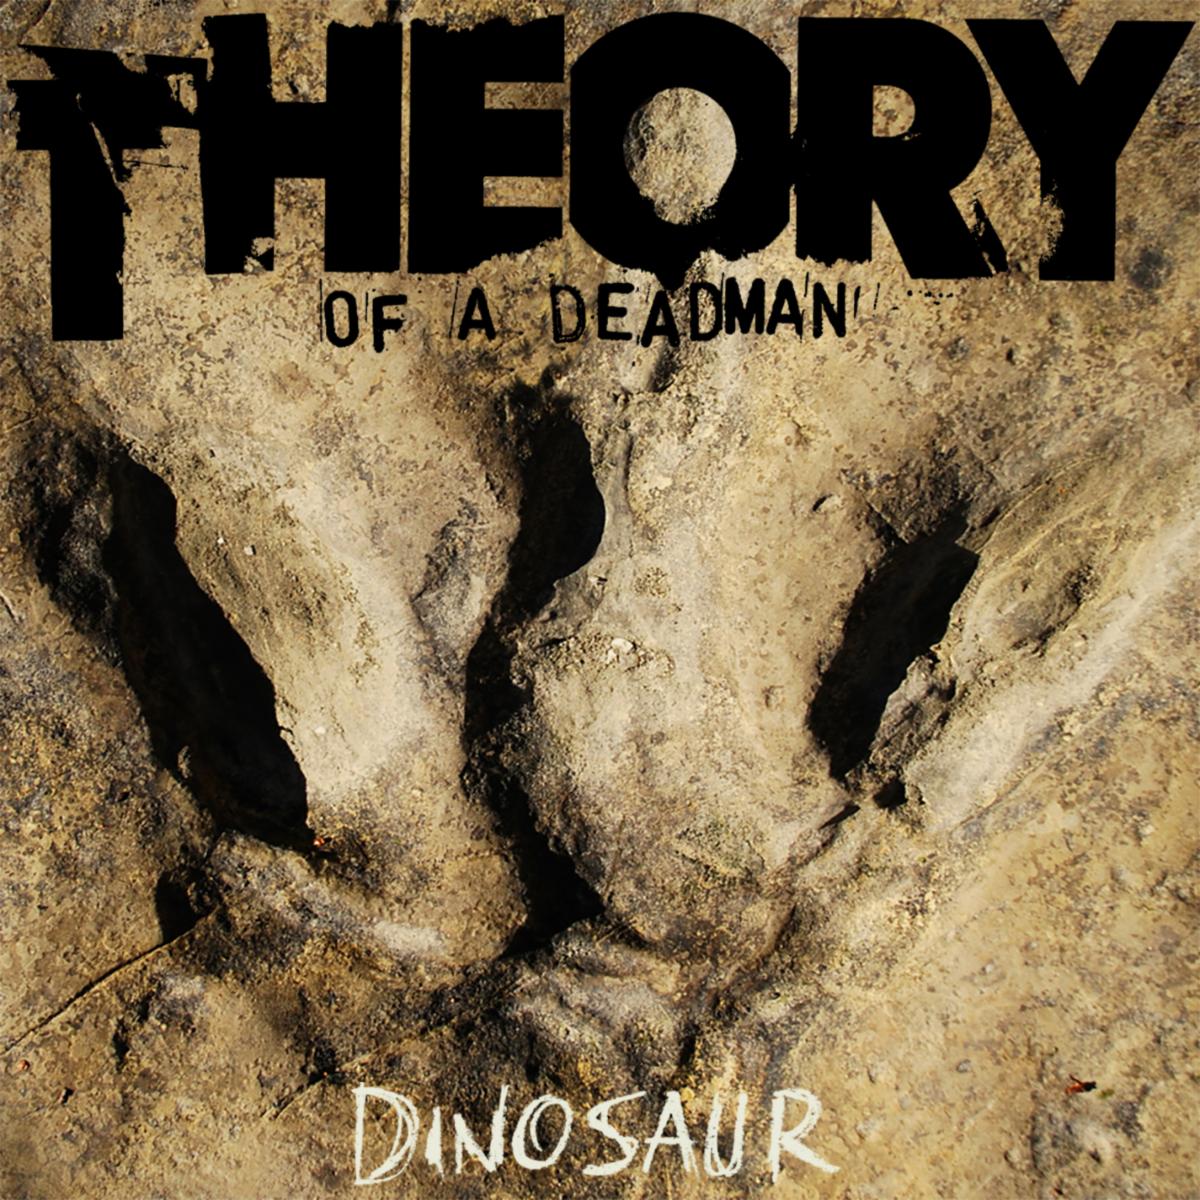 Theory Of A Deadman Releases Official Music Video for “Dinosaur”